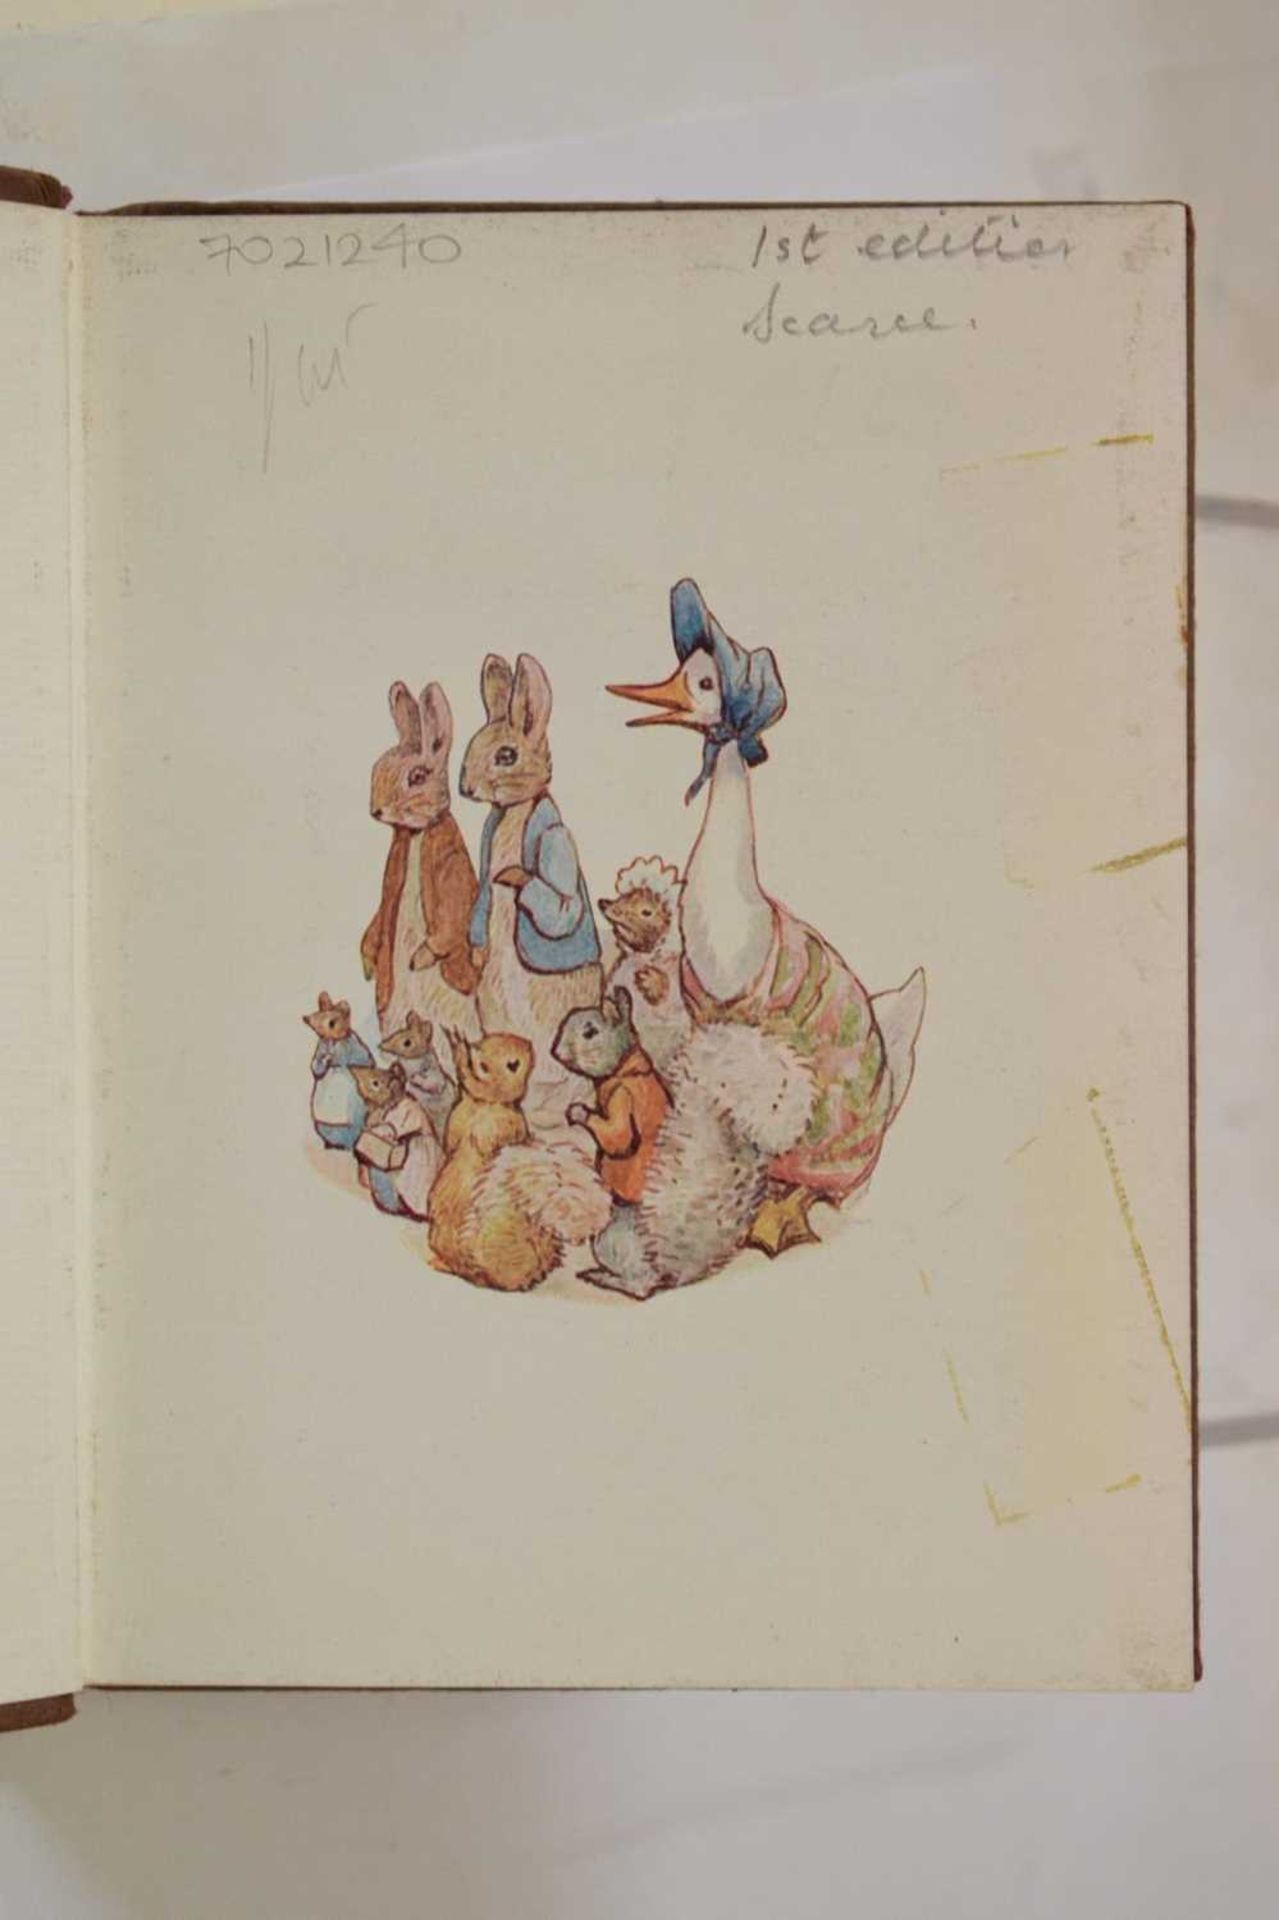 Potter, Beatrix - 'The Tale of Pigling Bland' - First edition 1913 - Image 18 of 19